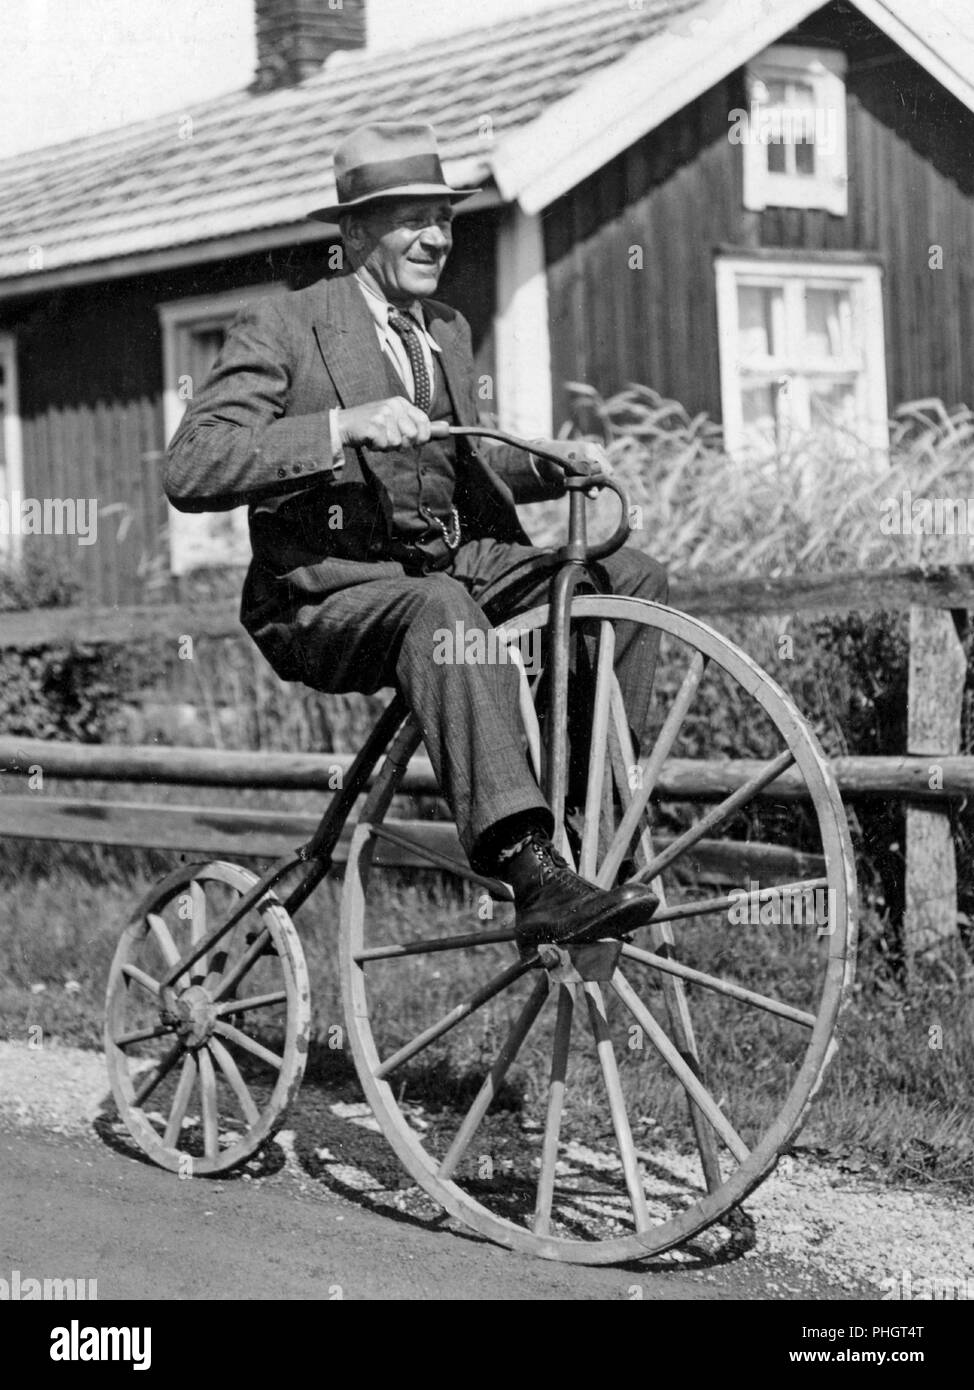 Penny farthing bicycle. A man is riding a penny-farthing bicycle he has made himself with wooden wheels both front and back. Sweden 1940s Stock Photo